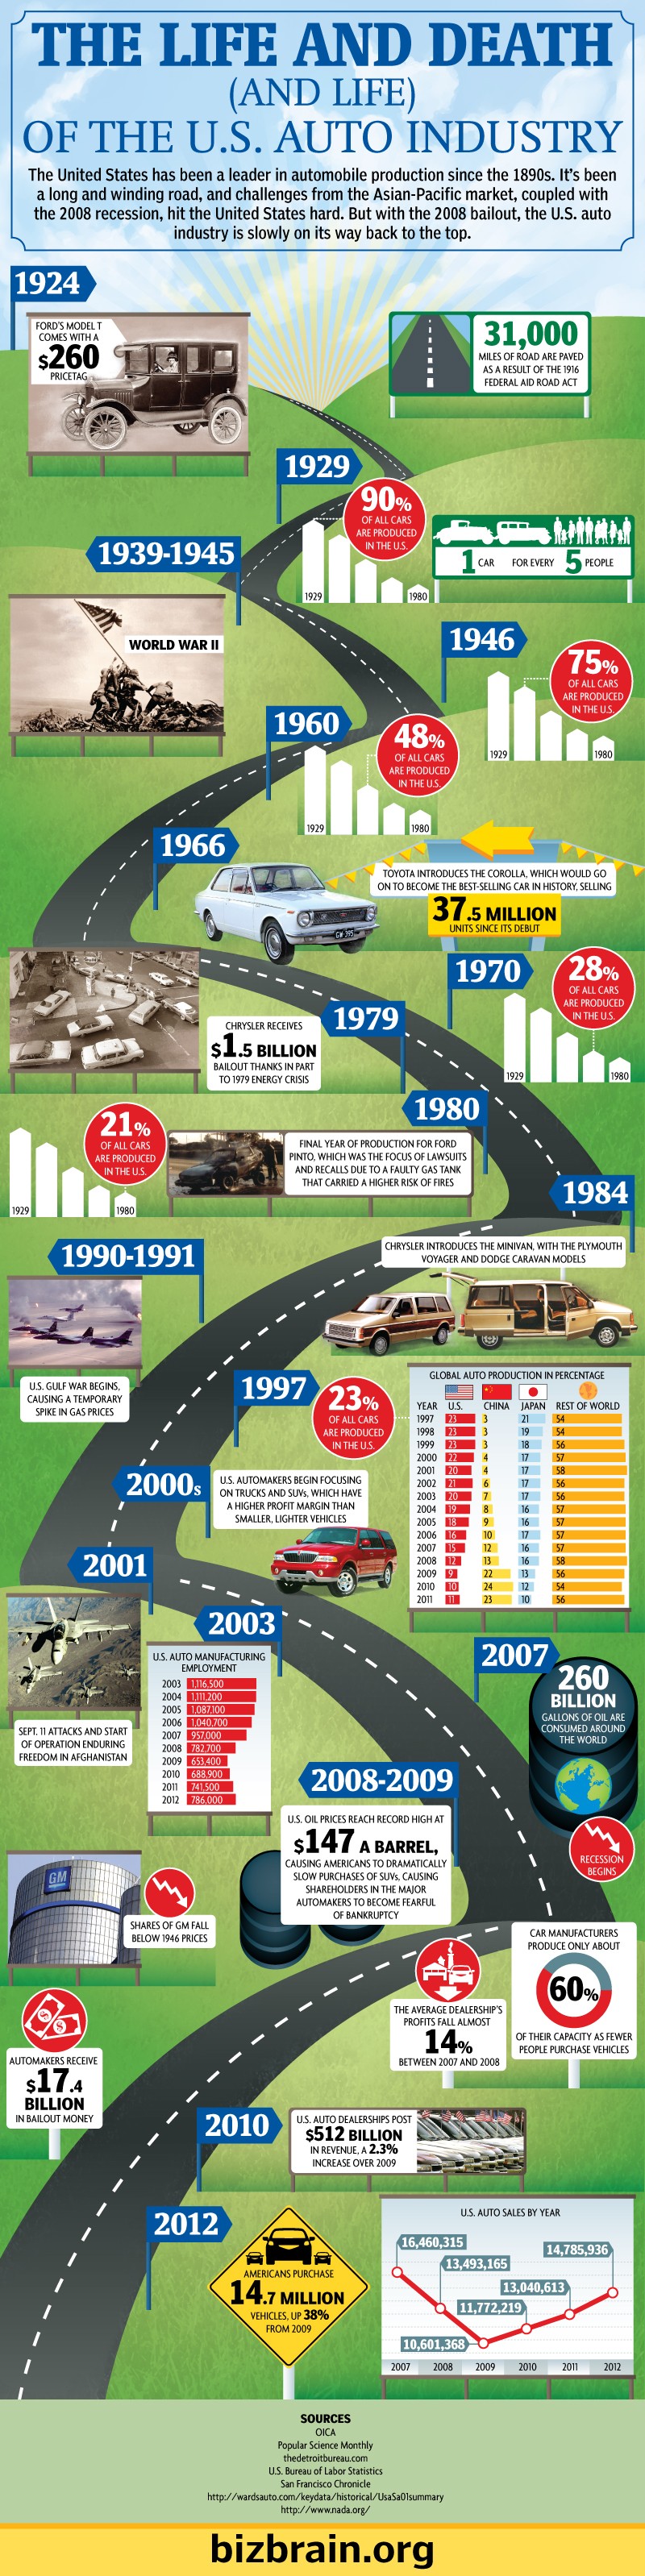 The Life and Death (and Life) of the US Auto Industry [Infographic]